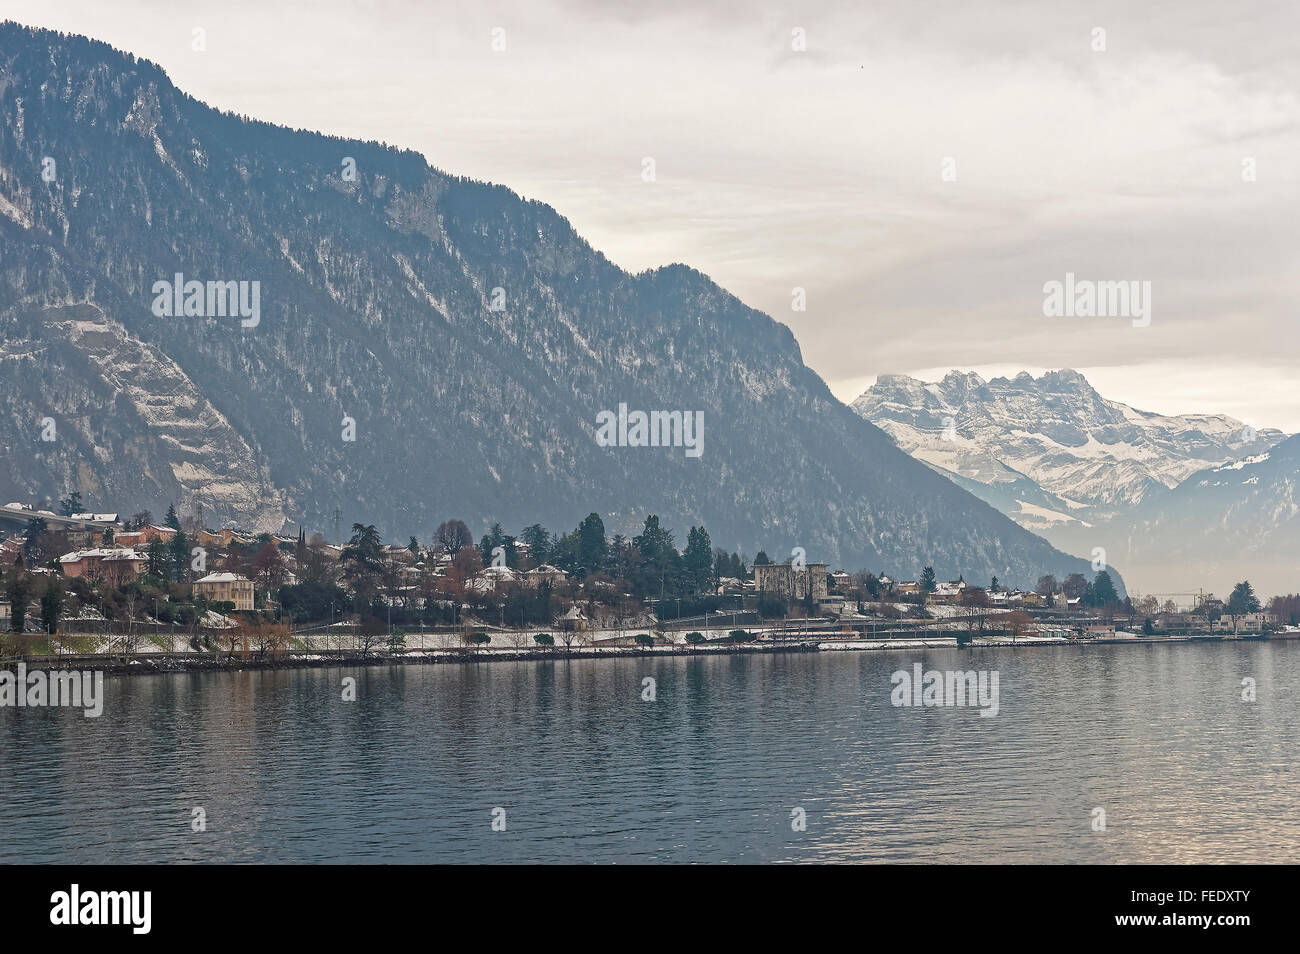 Panoramic View of Montreux and Lake Geneva in winter. Montreux is a city in the canton of Vaud in Switzerland. It is located on Stock Photo